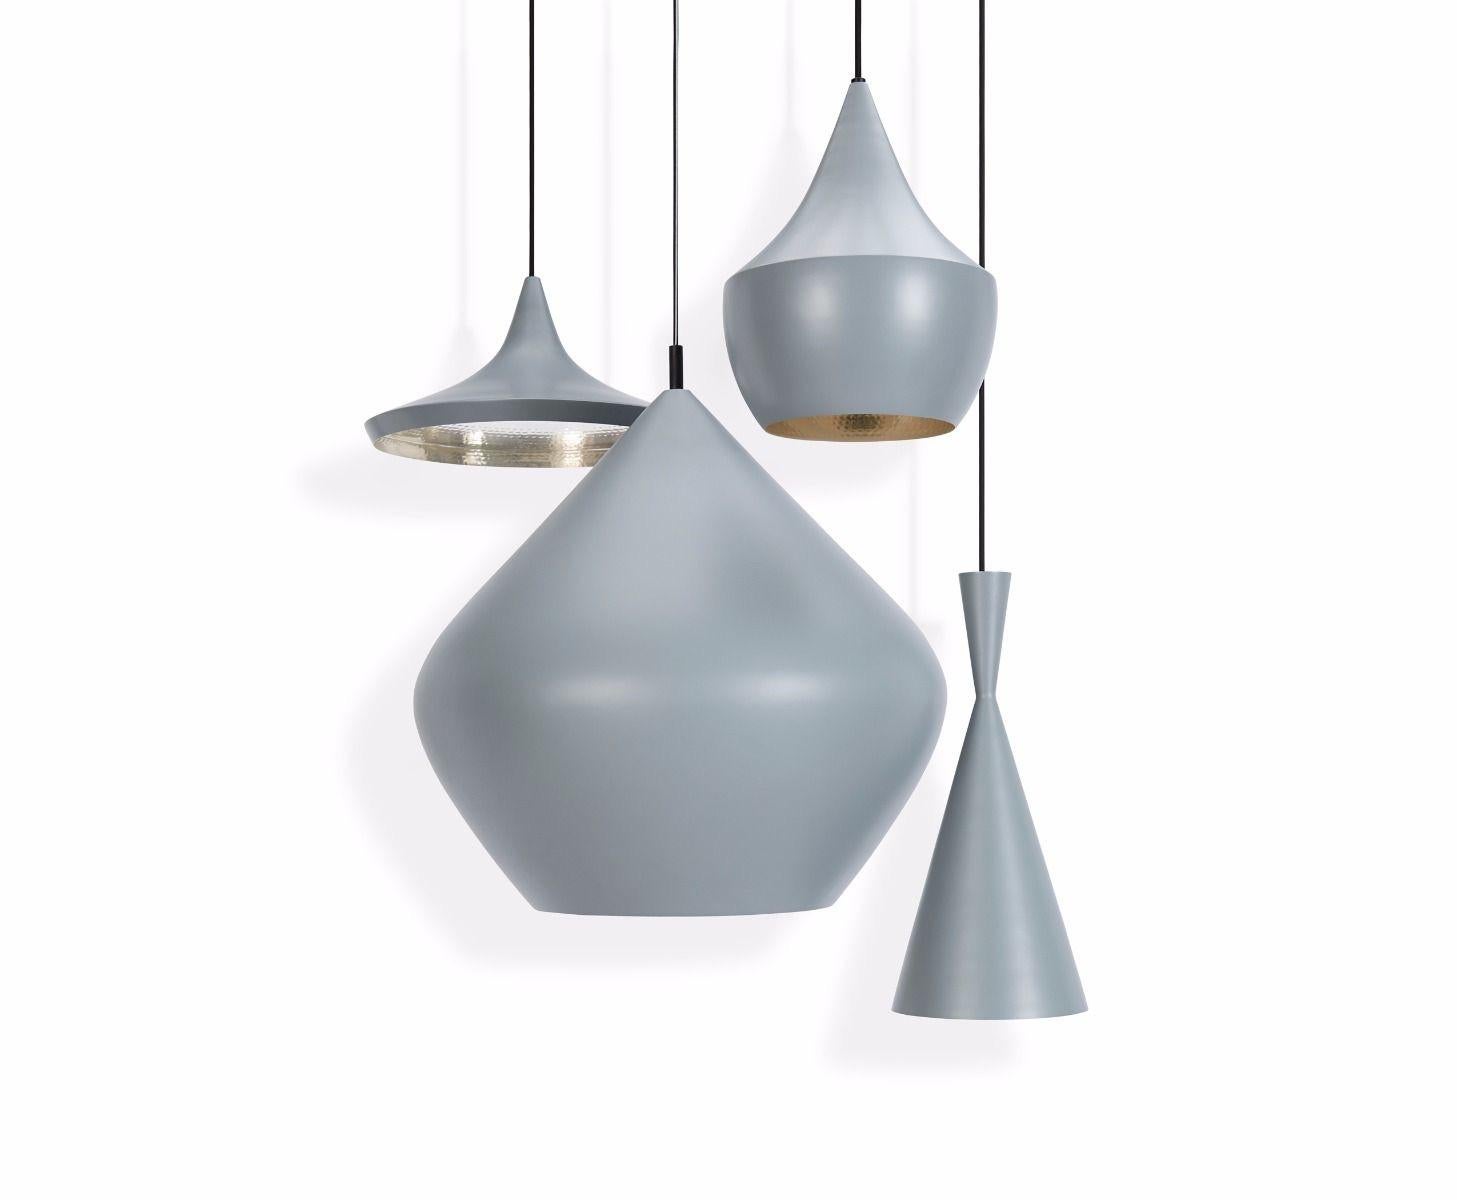 Minimal Tom Dixon beat wide white pendant brass light fixture, Contemporary. Gorgeous piece. Retails for 575 USD.

The beat wide pendant by Tom Dixon brings the rustic, down-to-earth appeal of traditional Indian cooking pots and water vessels to